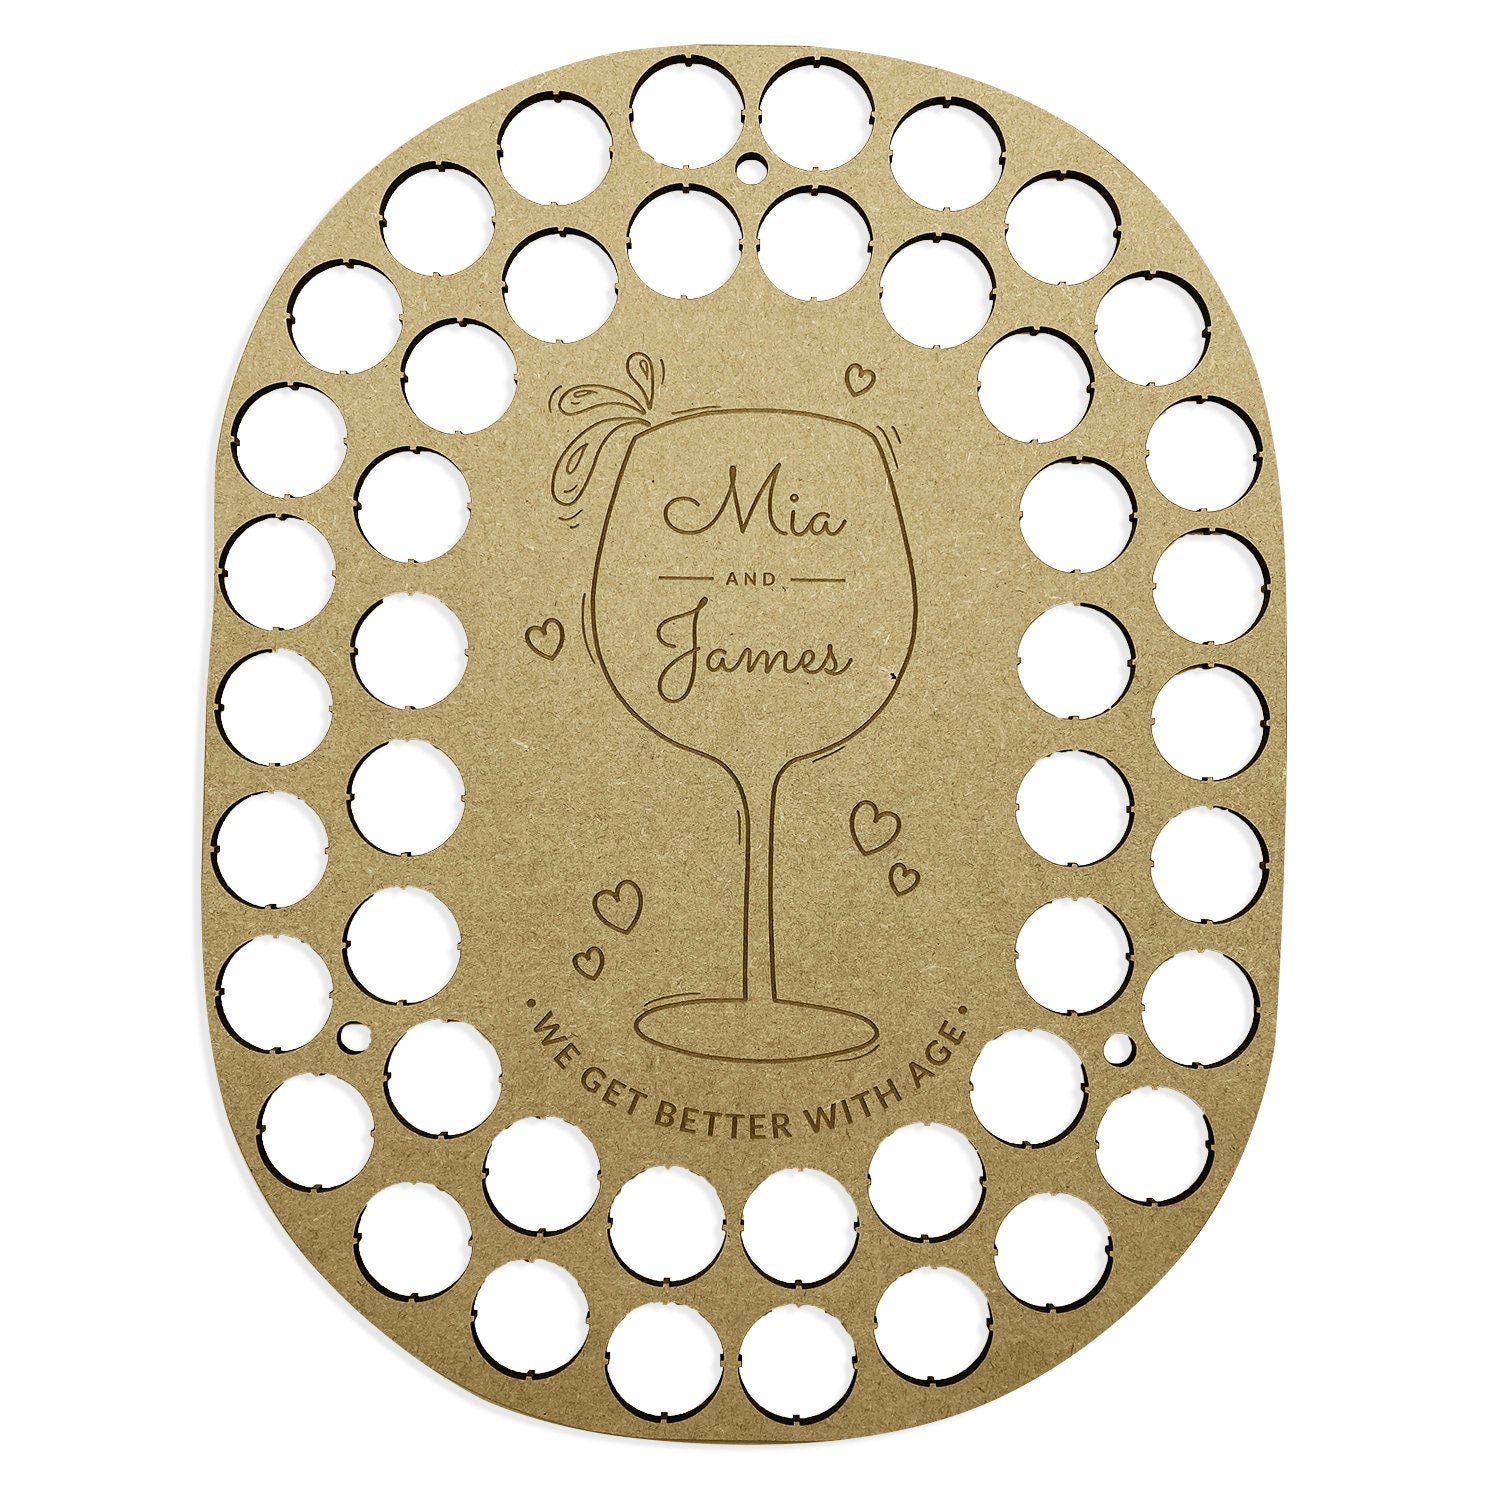 Personalised Wine Cork Collection Wall Display, Oval Shape - Ideal Wedding or Anniversary Gift